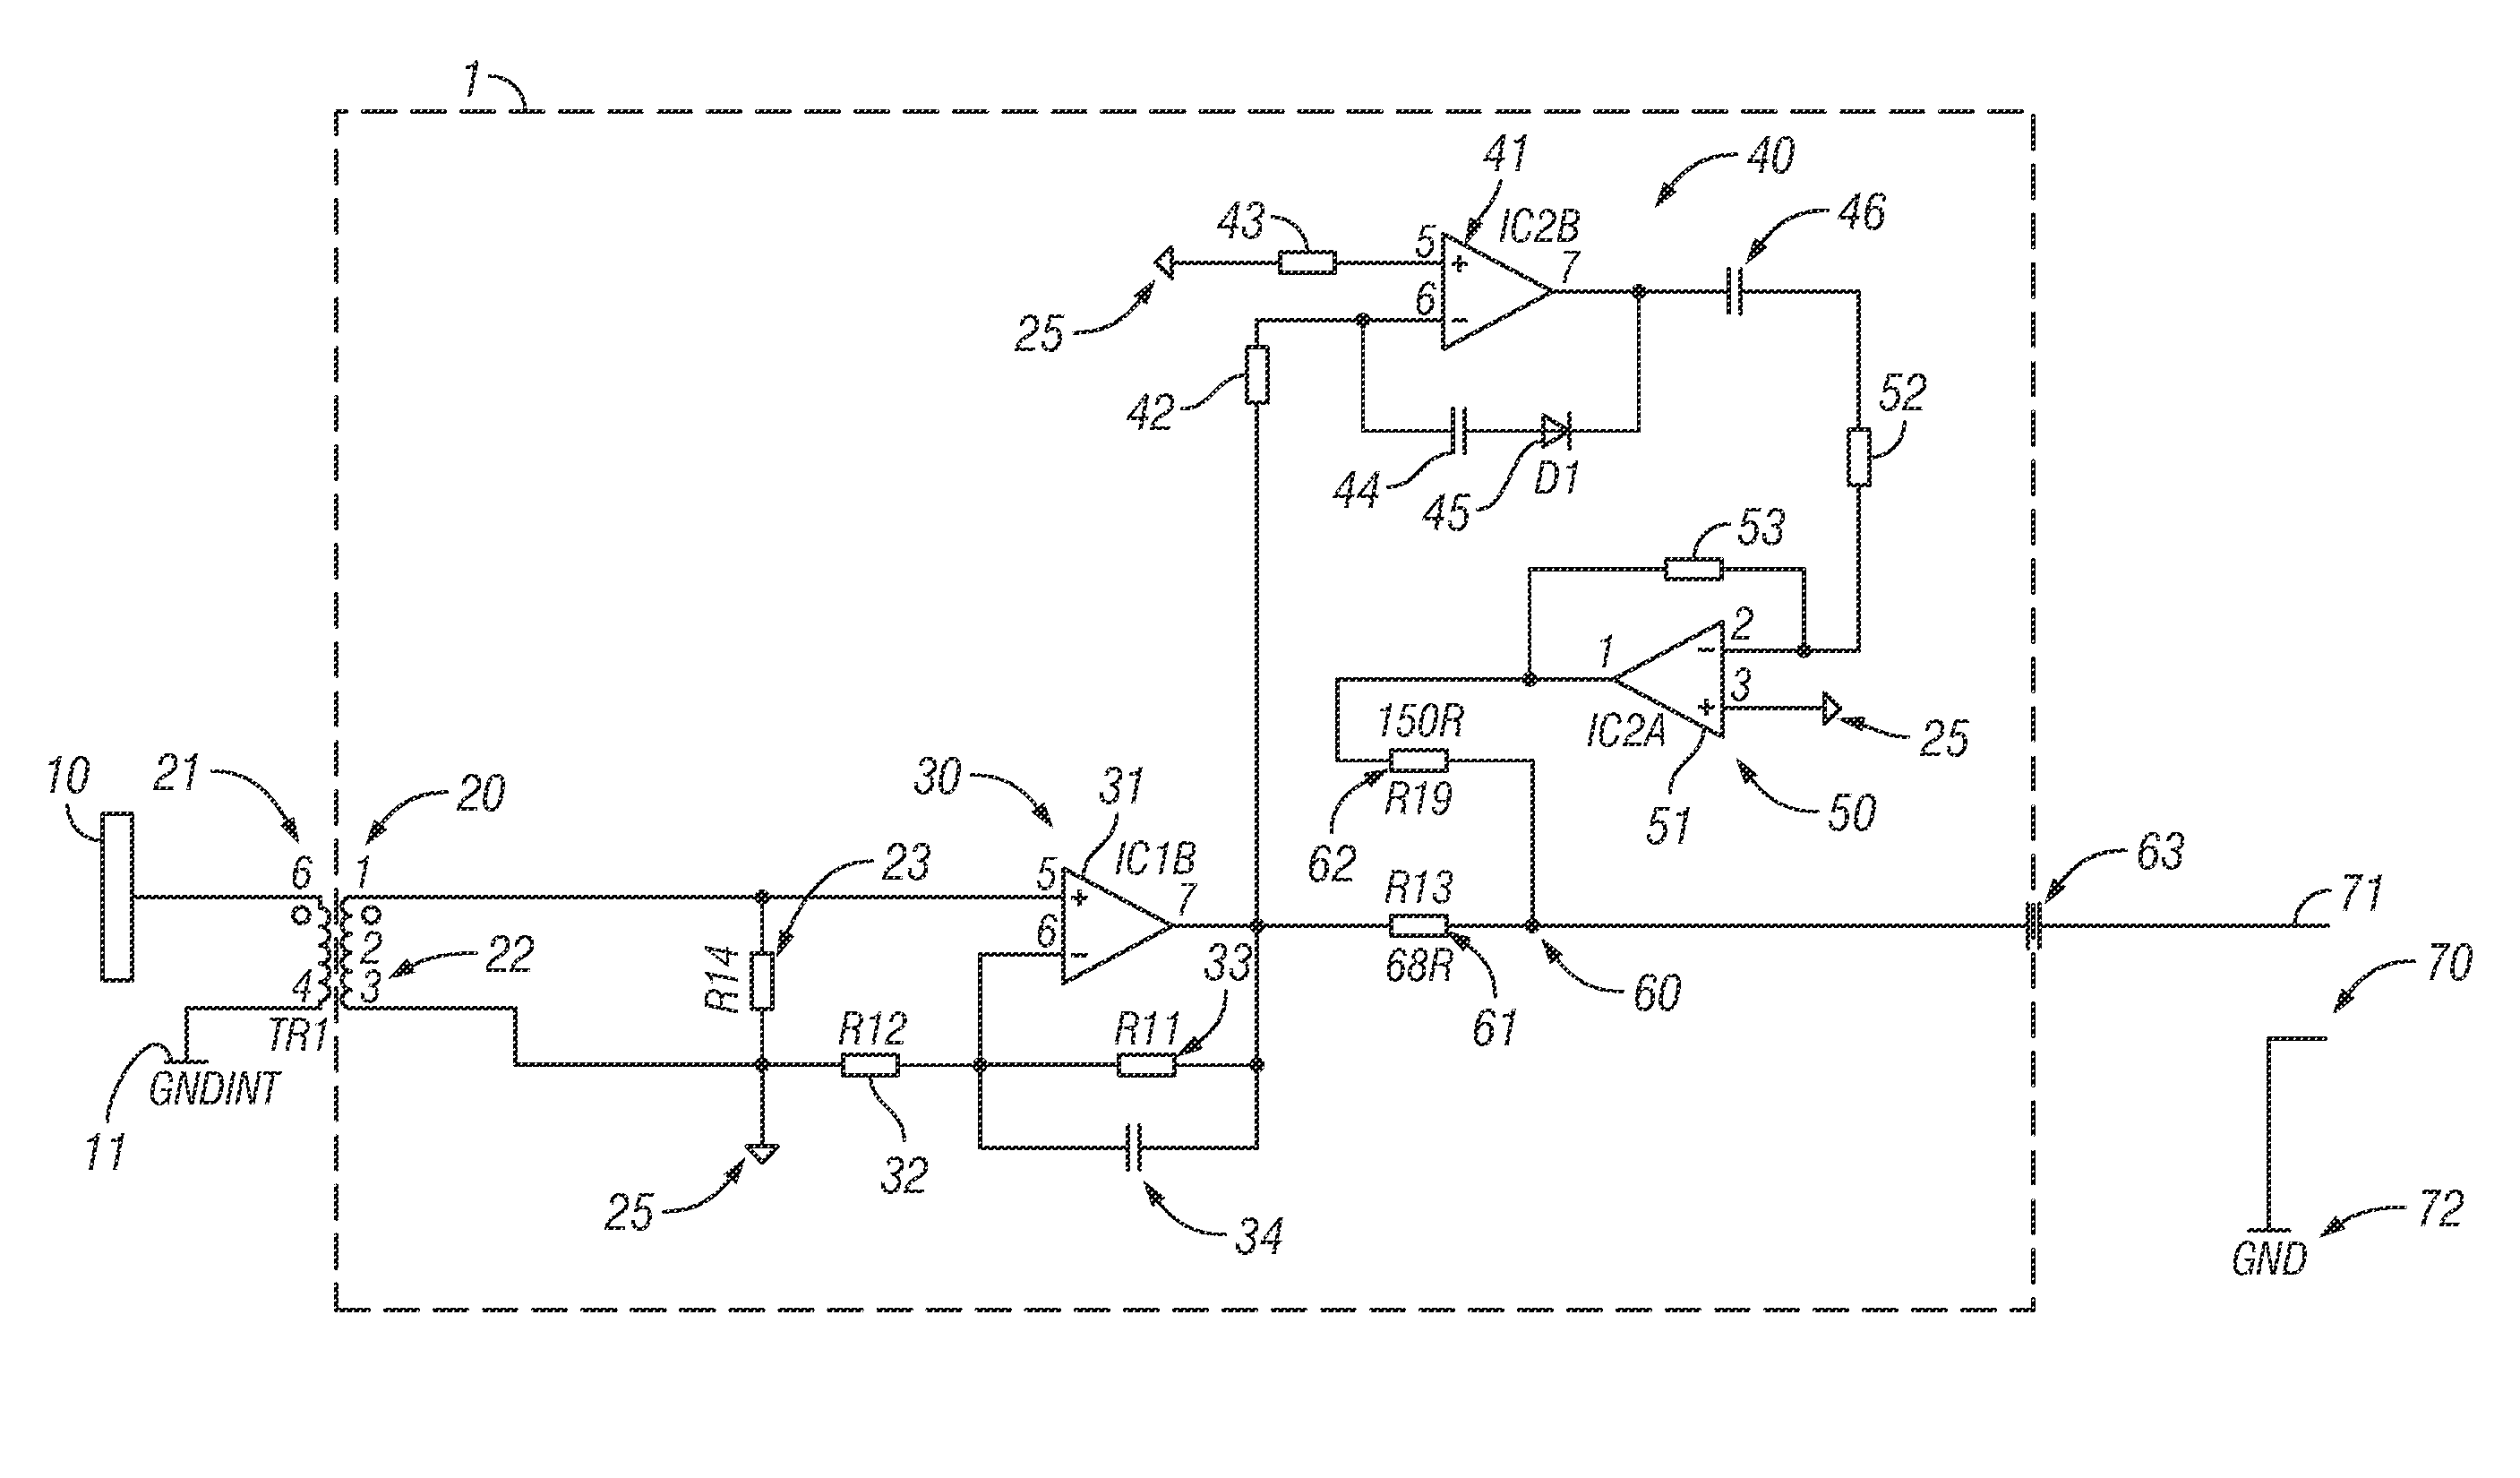 Preamplifier for charged particle detection